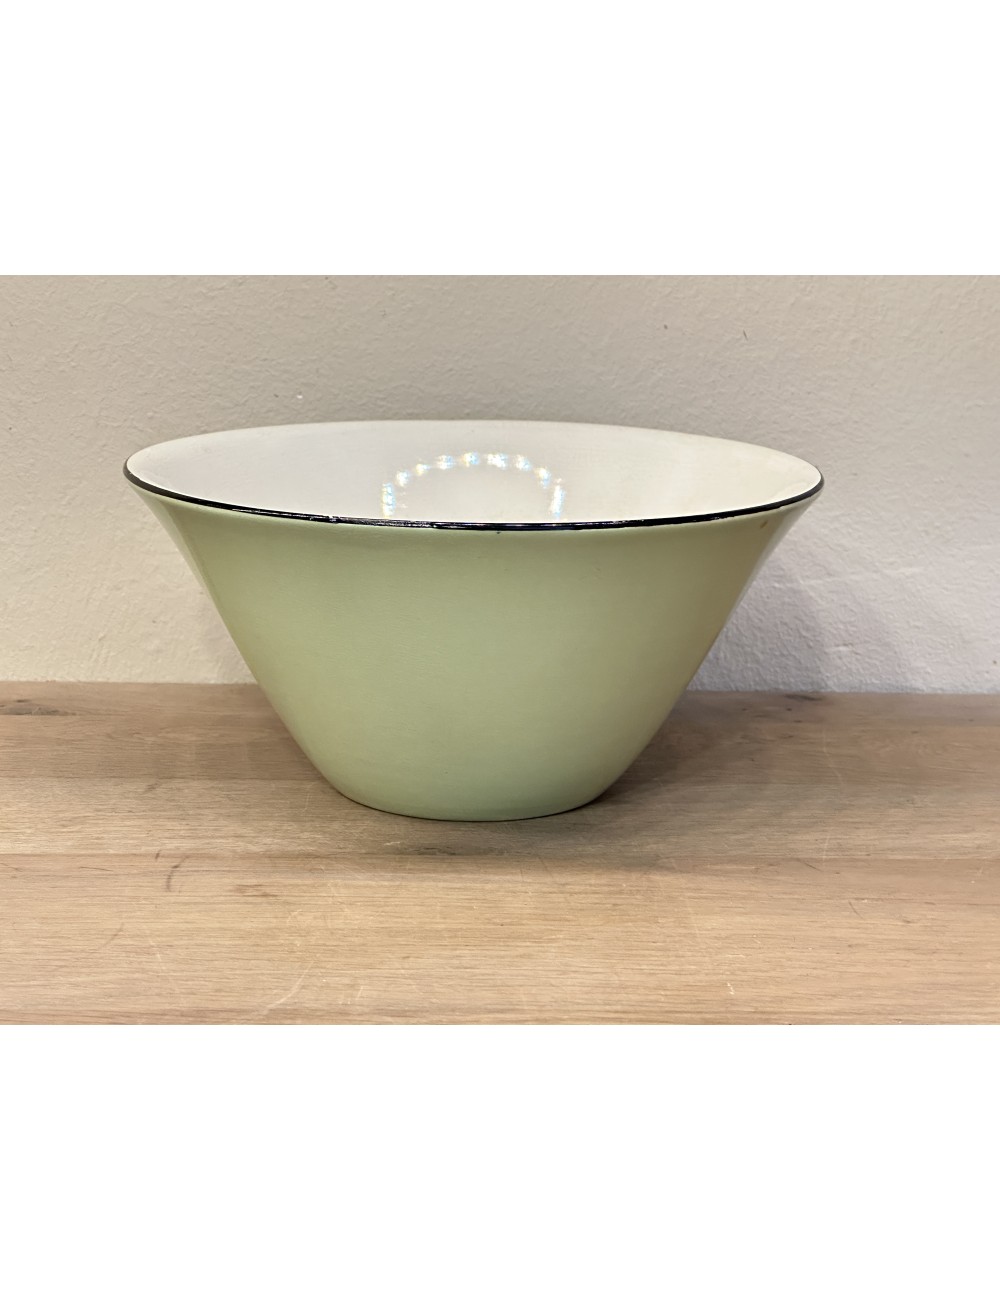 Bowl / Plate - higher model - Moulin des Loups - décor in green with a black border